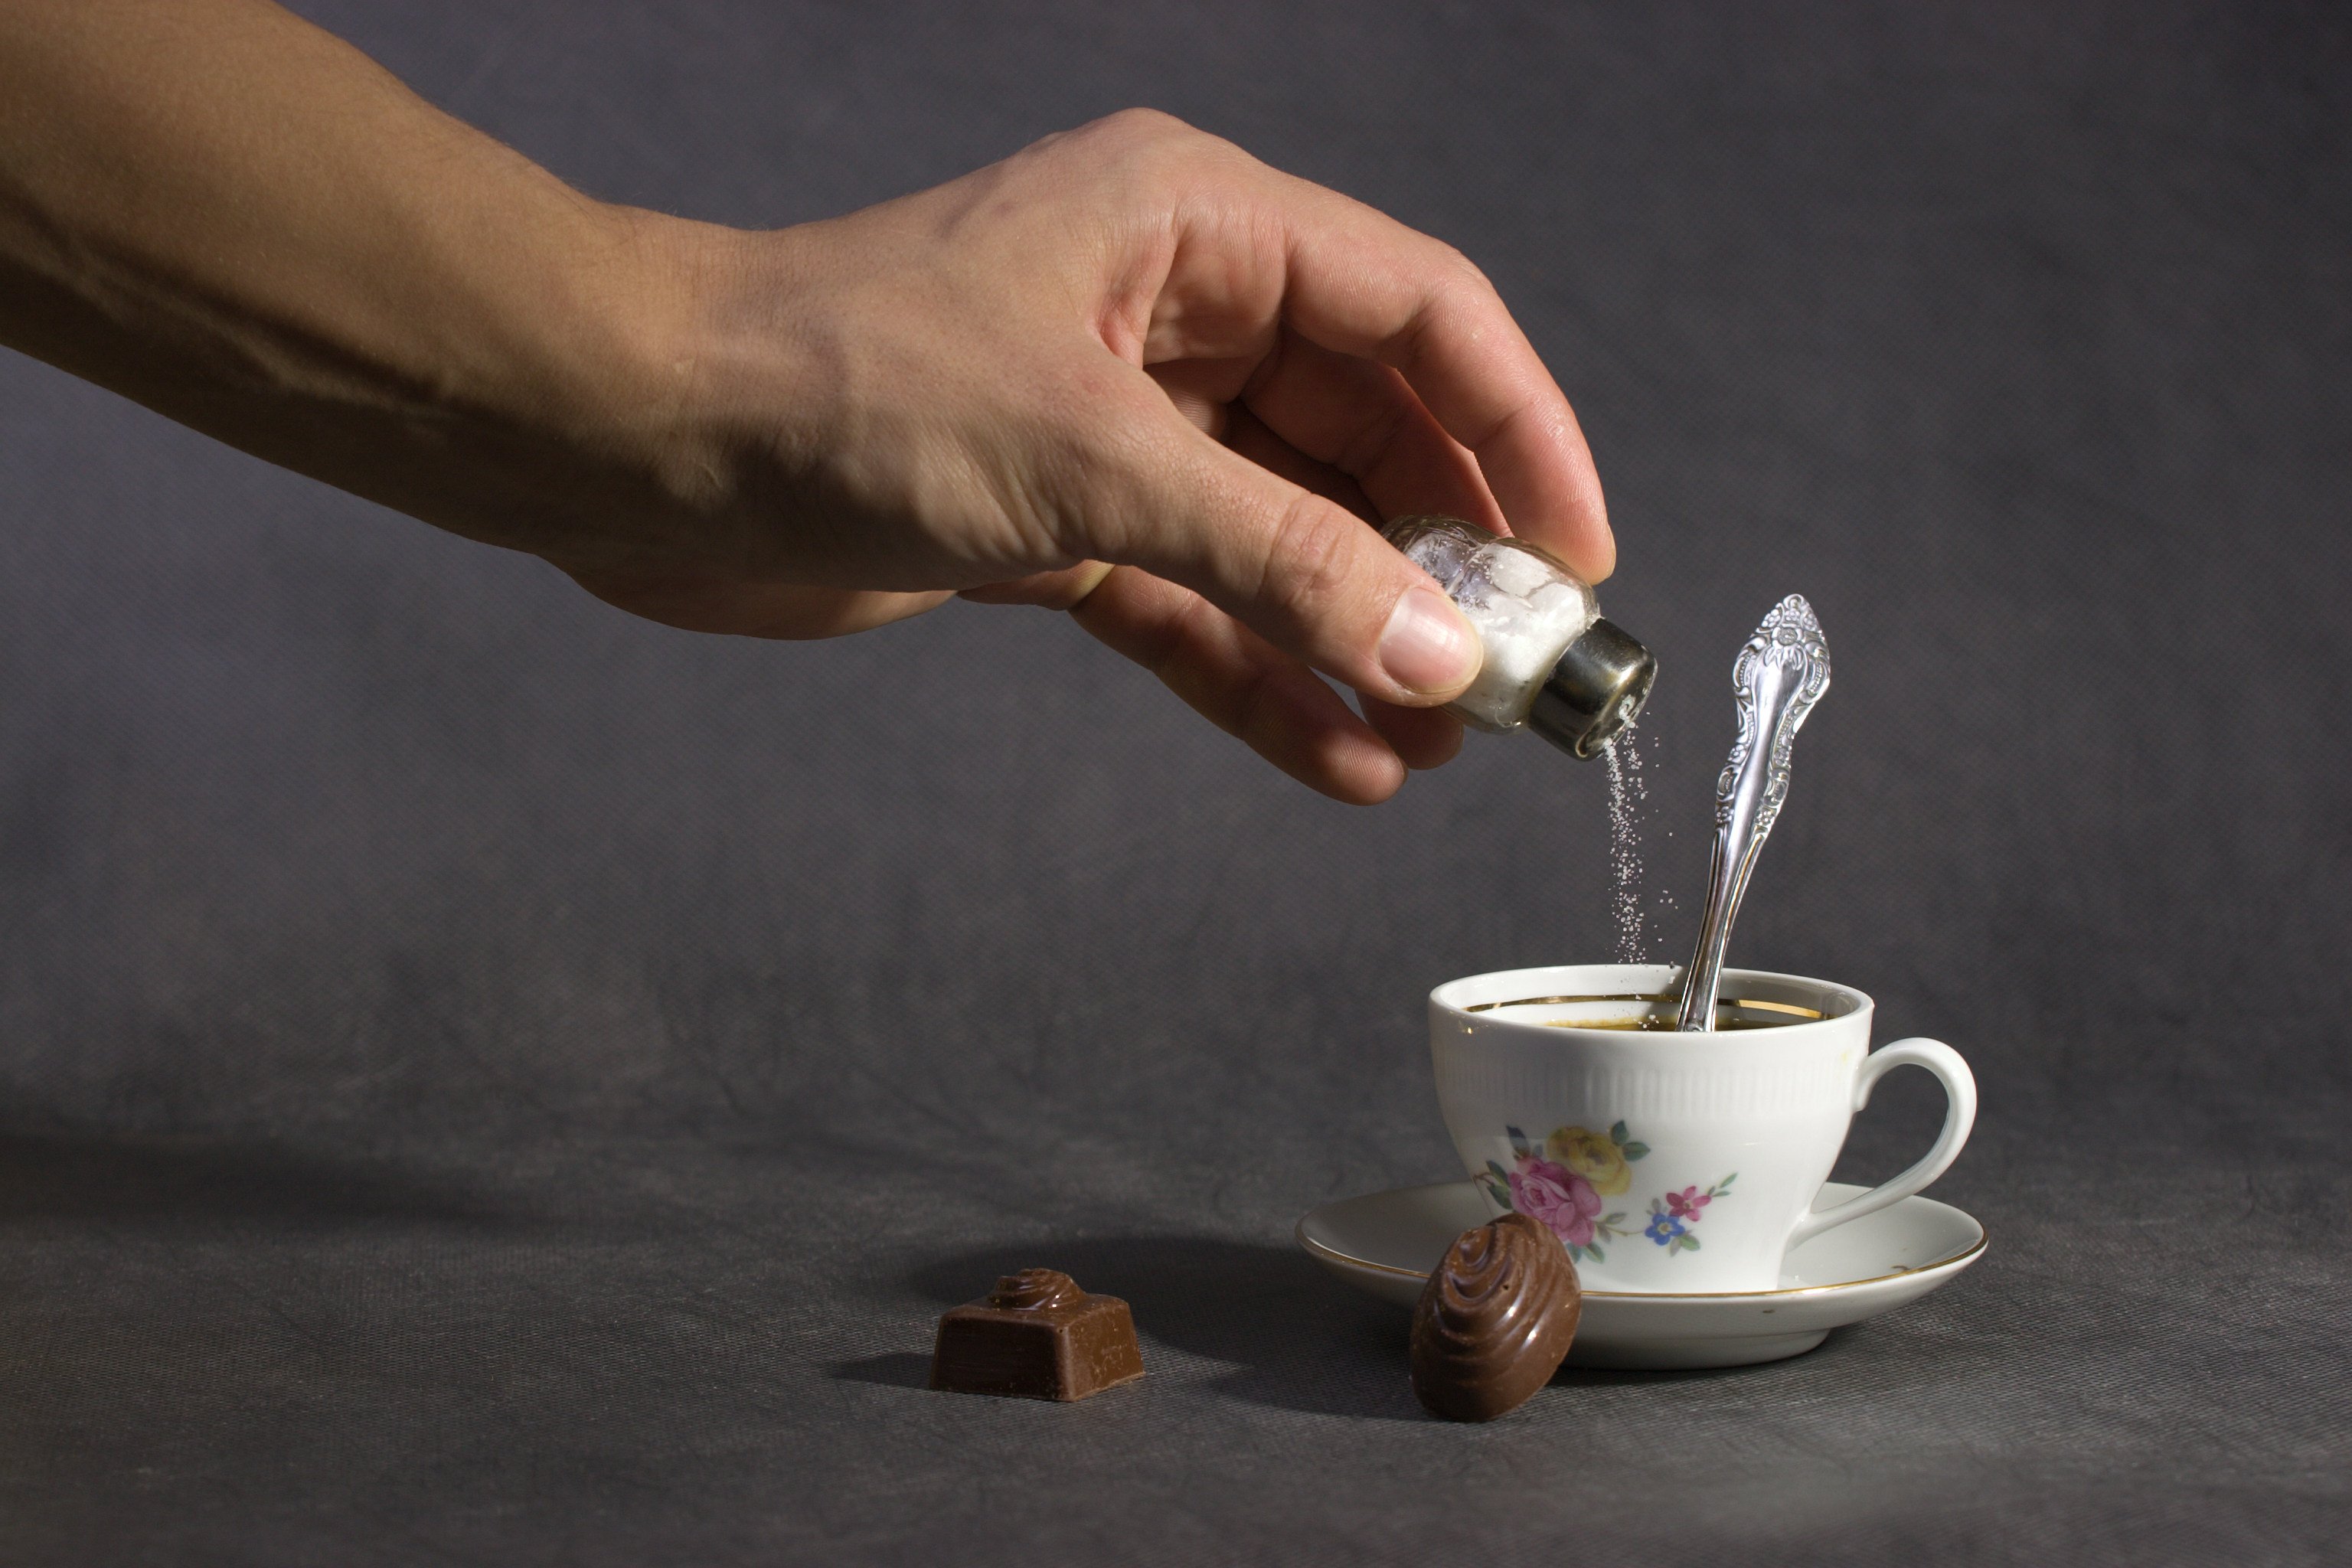 A US chemist’s advice to add a pinch of salt to tea or coffee to make them less bitter has not gone down well with British traditionalists. Photo: Shutterstock